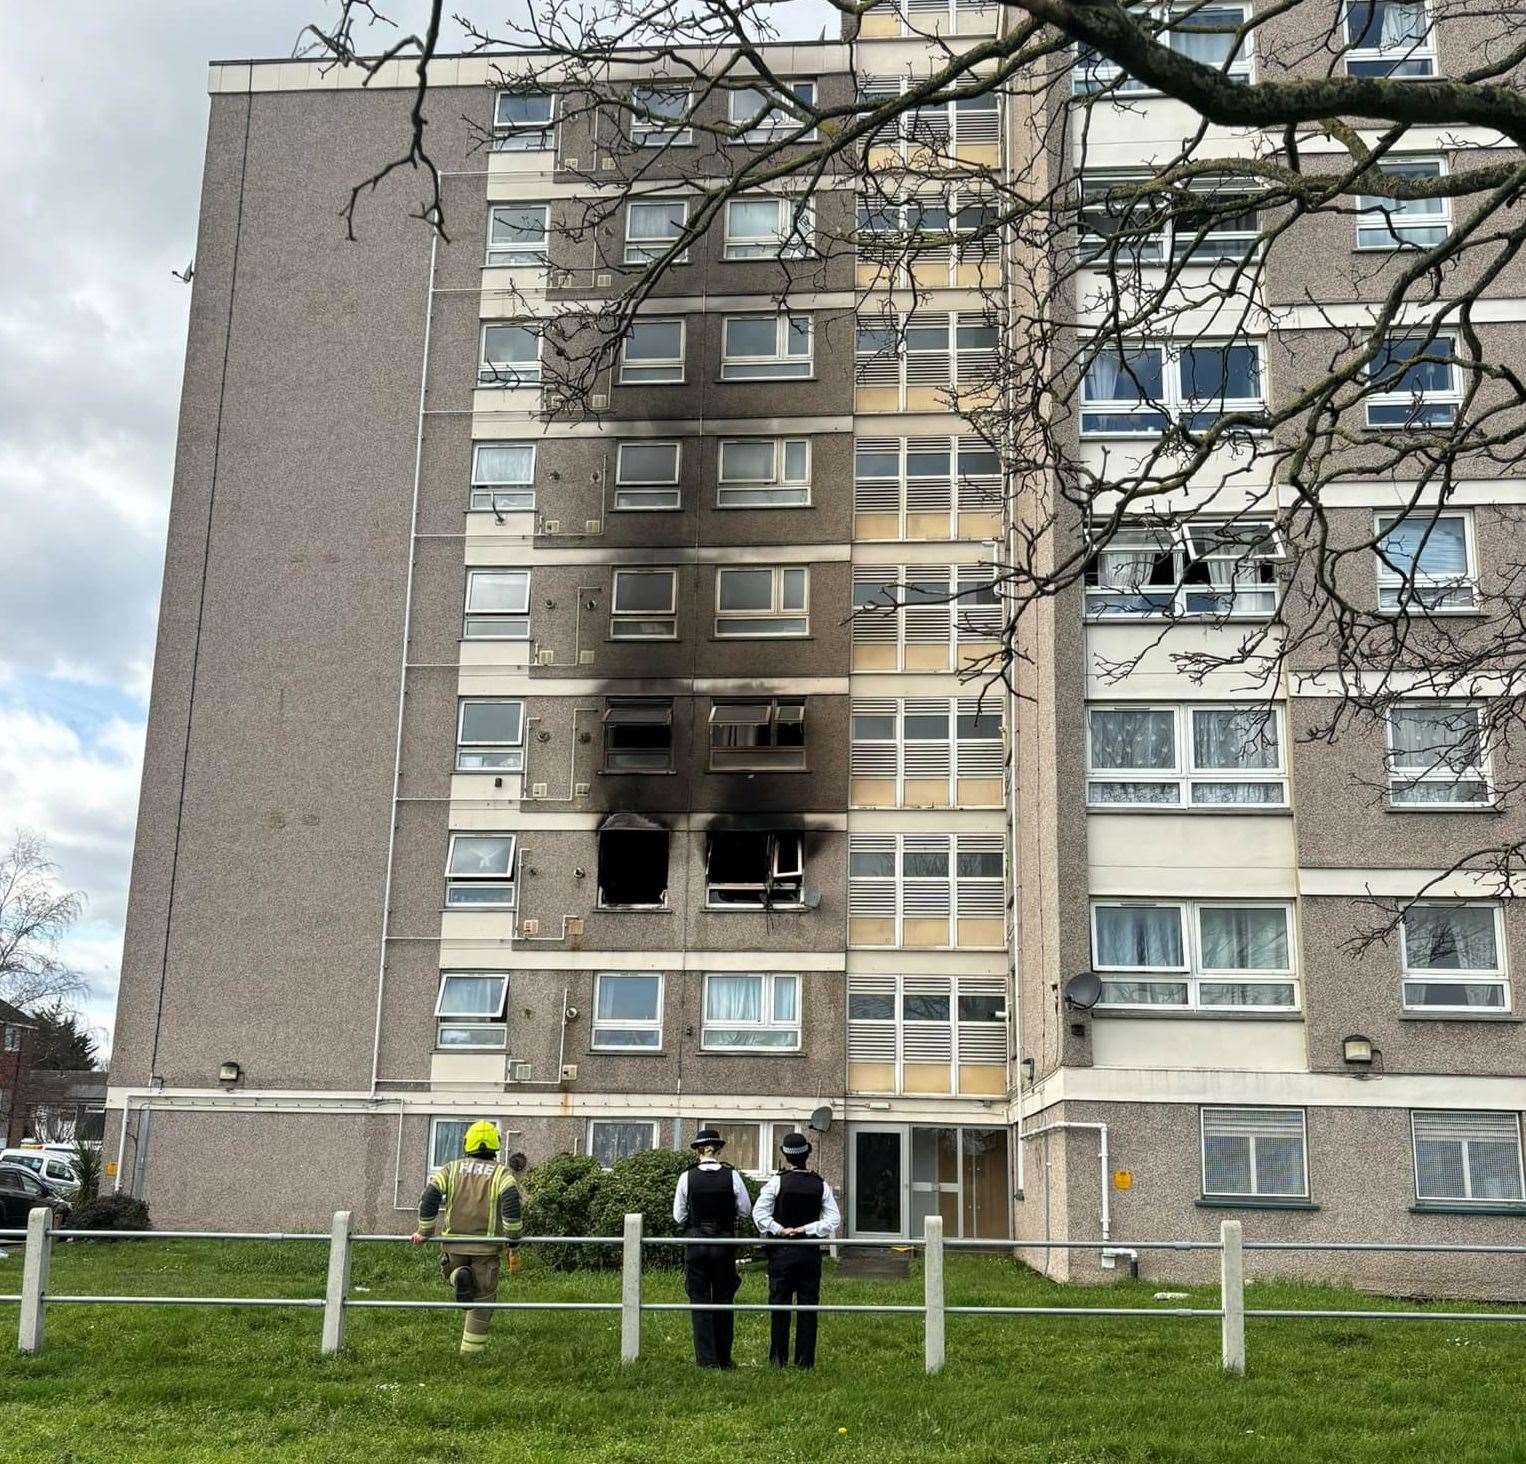 Ten fire engines and around 70 firefighters tackled the blaze at Sun Court. Picture: Casey